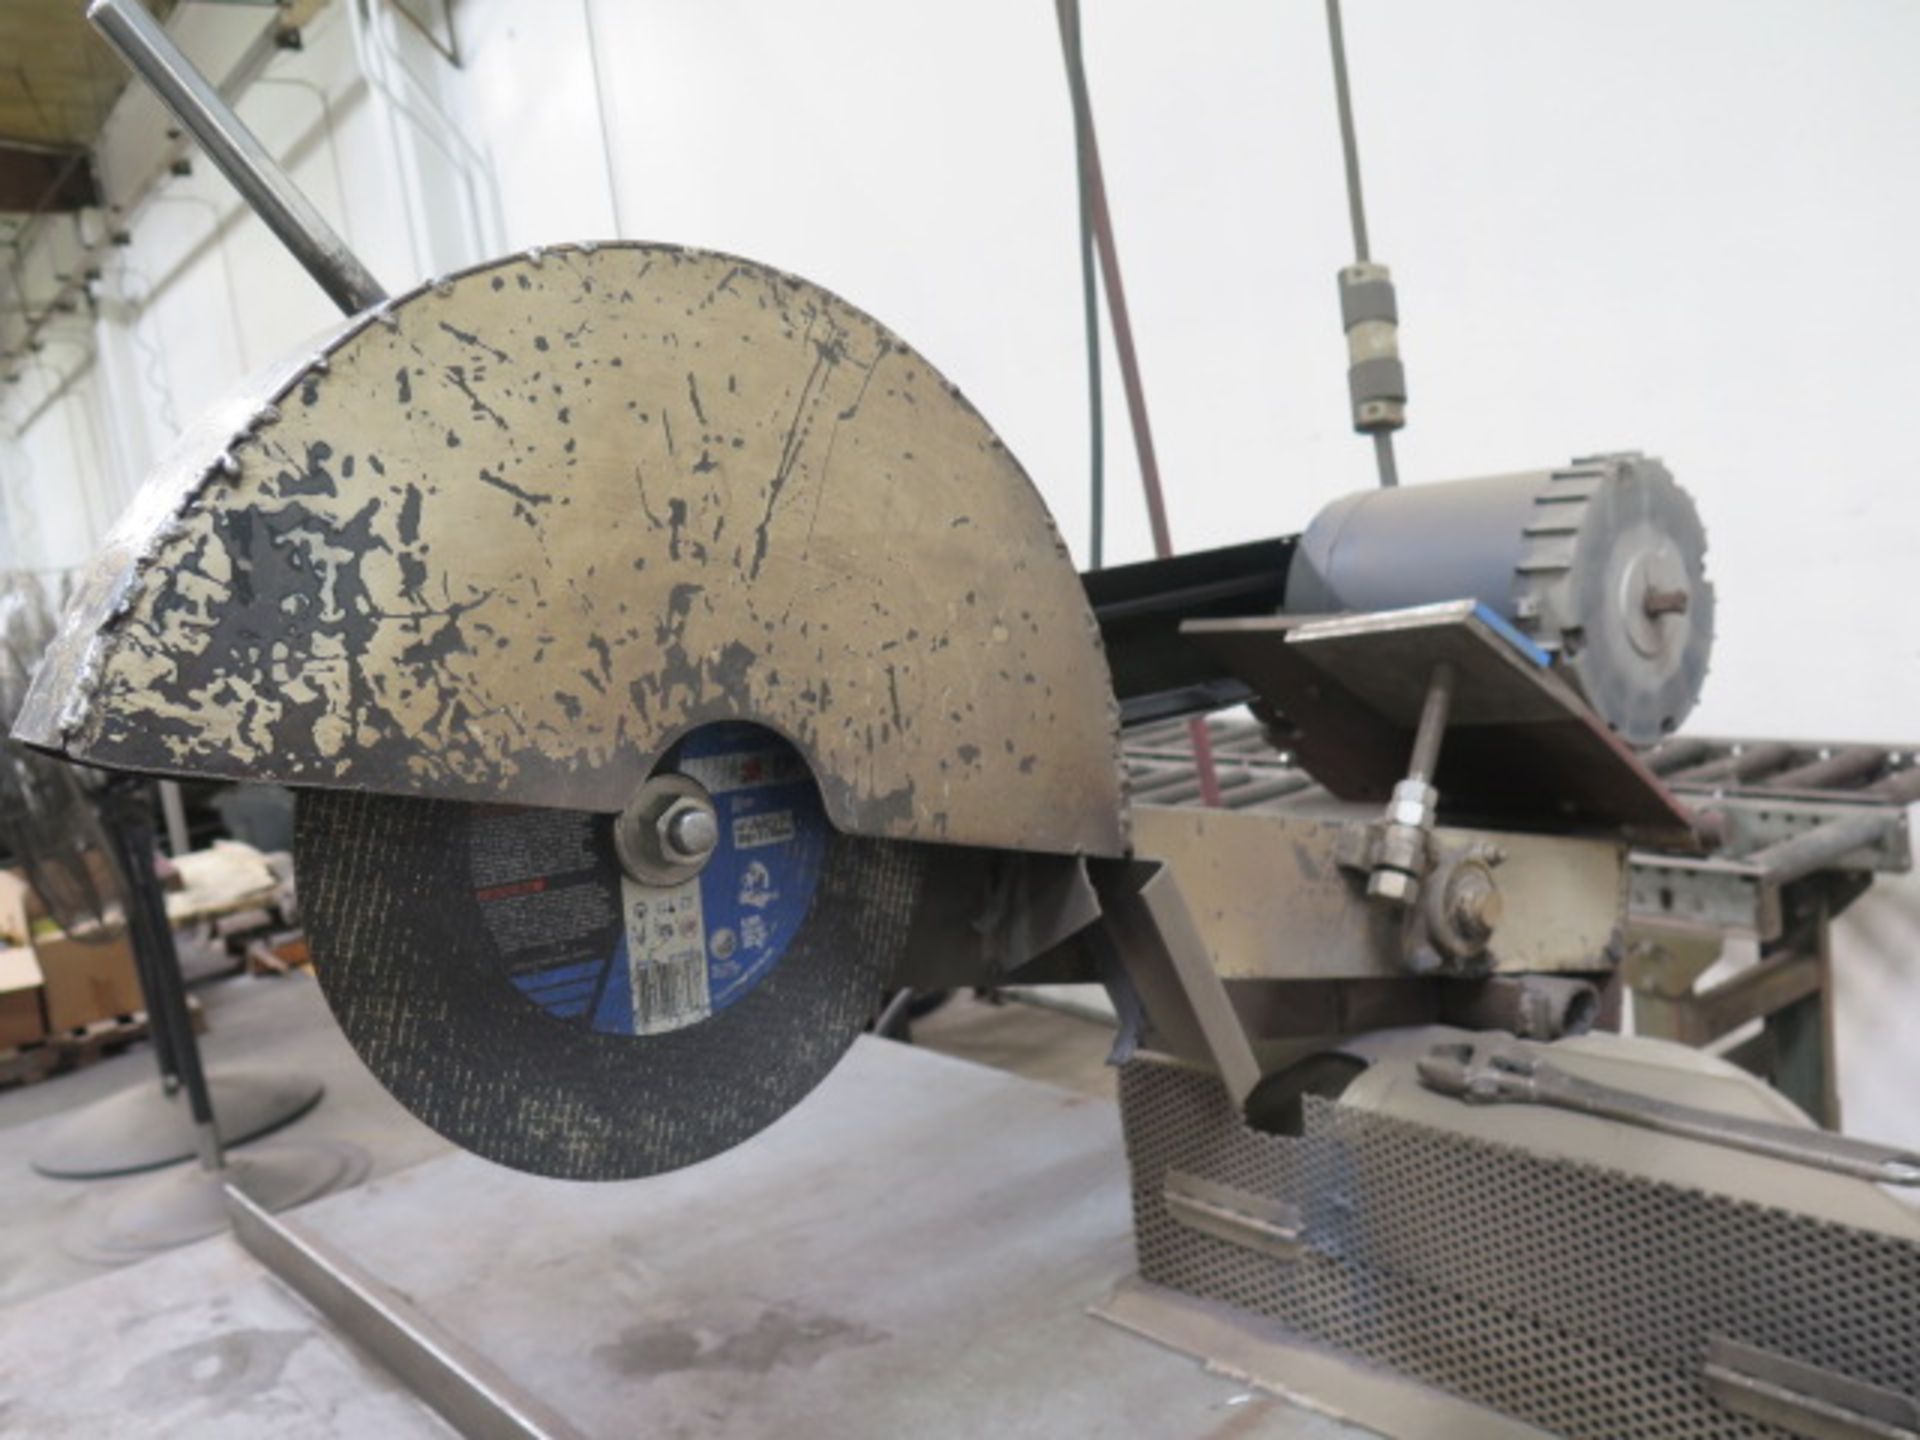 Poly Products 16" Abrasive Cutoff Saw w/ 3Hp Motor, Conveyor - Image 3 of 4